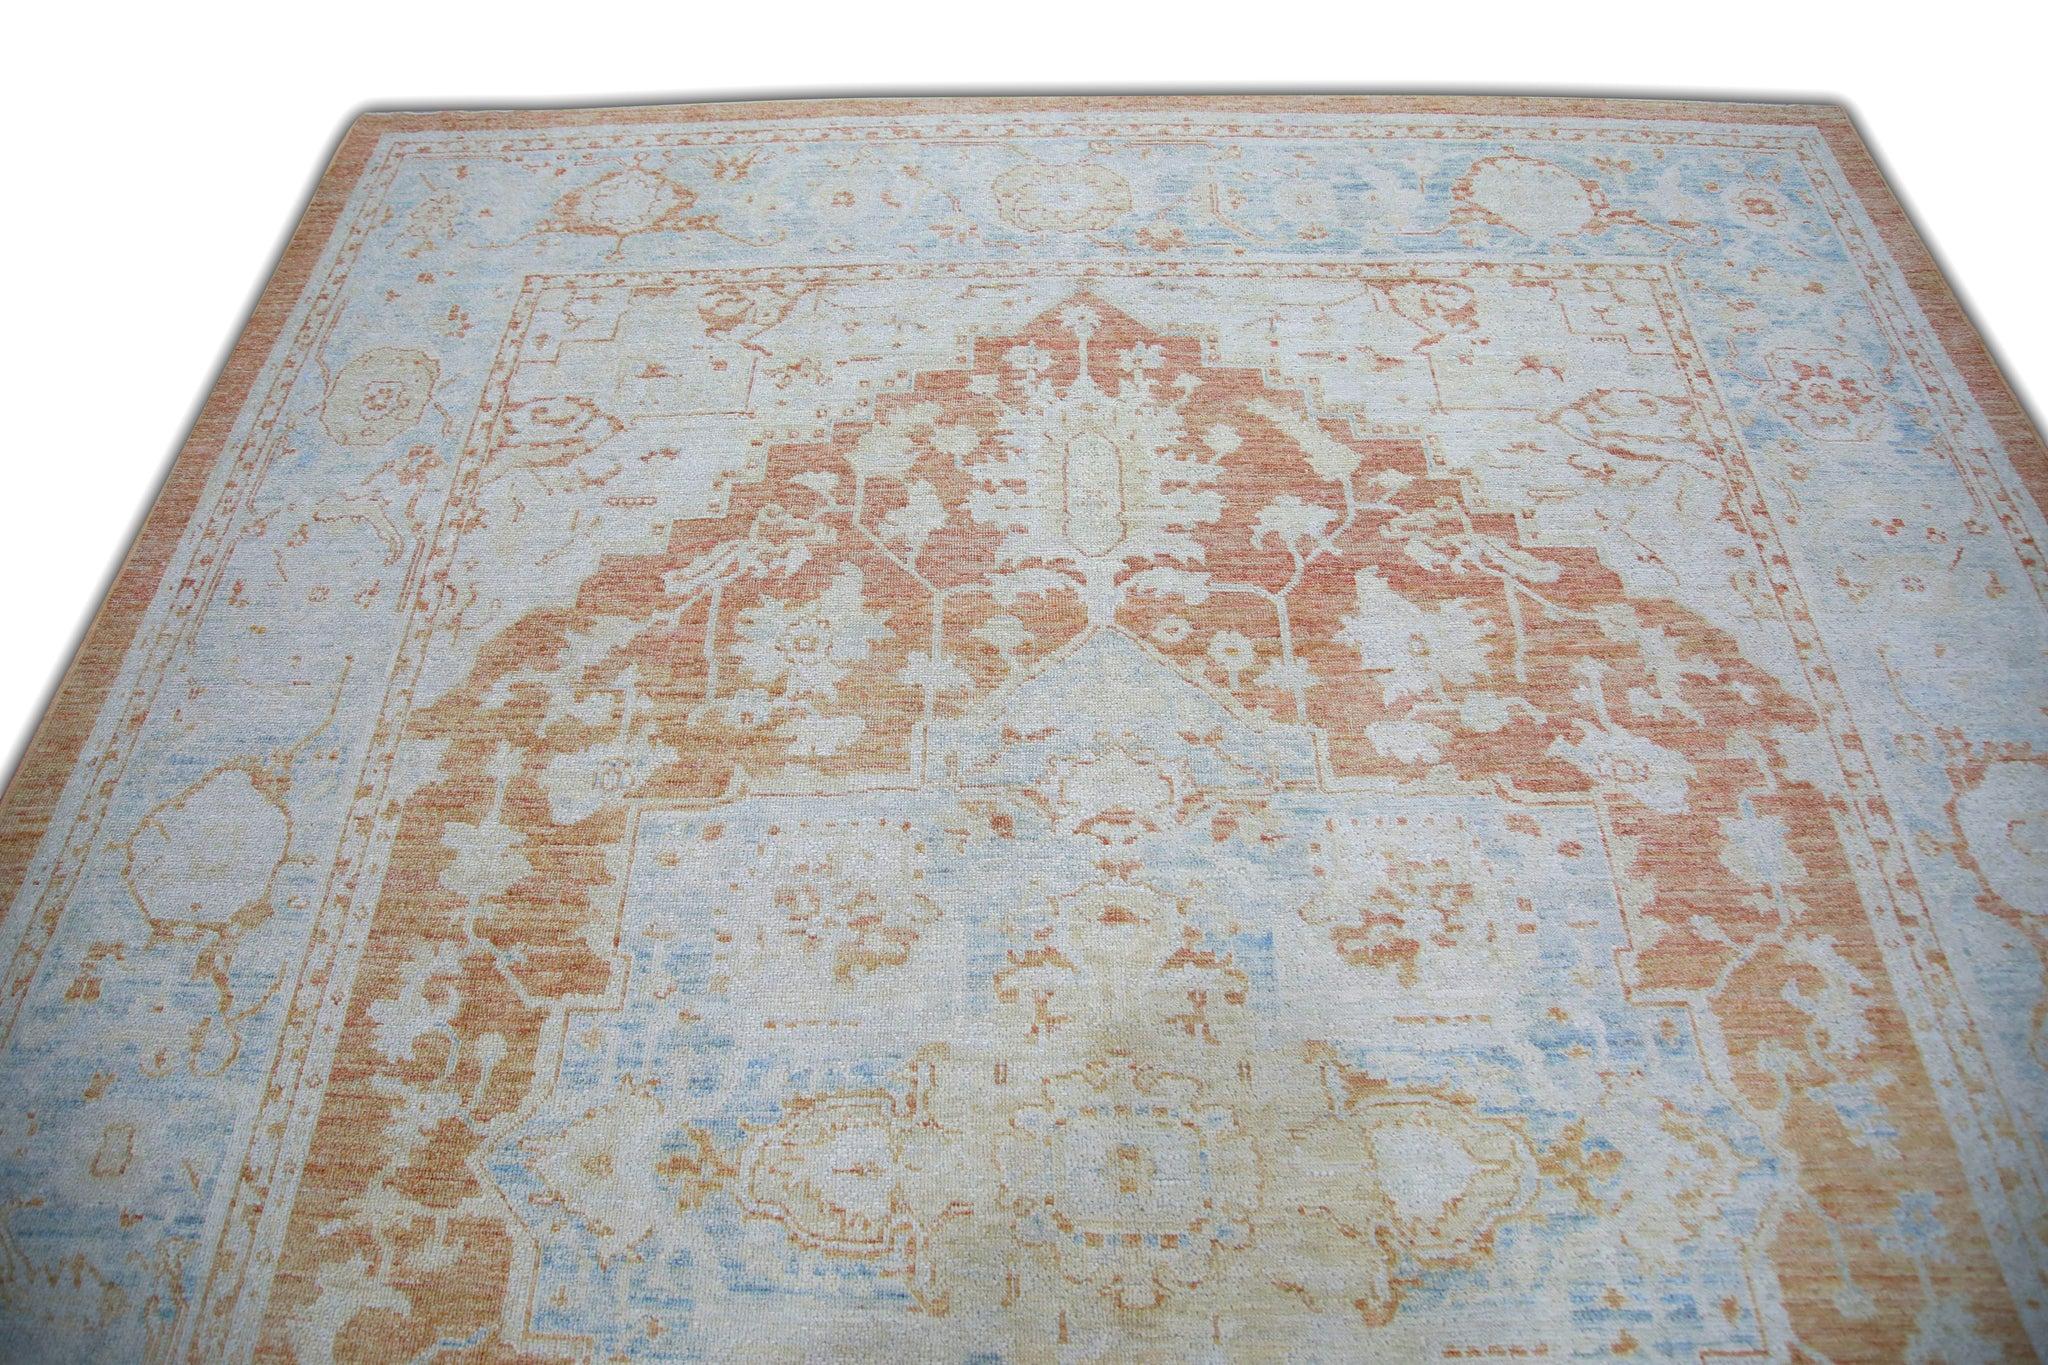 Floral Turkish Finewoven Wool Oushak Rug in Baby Blue and Salmon 7'9